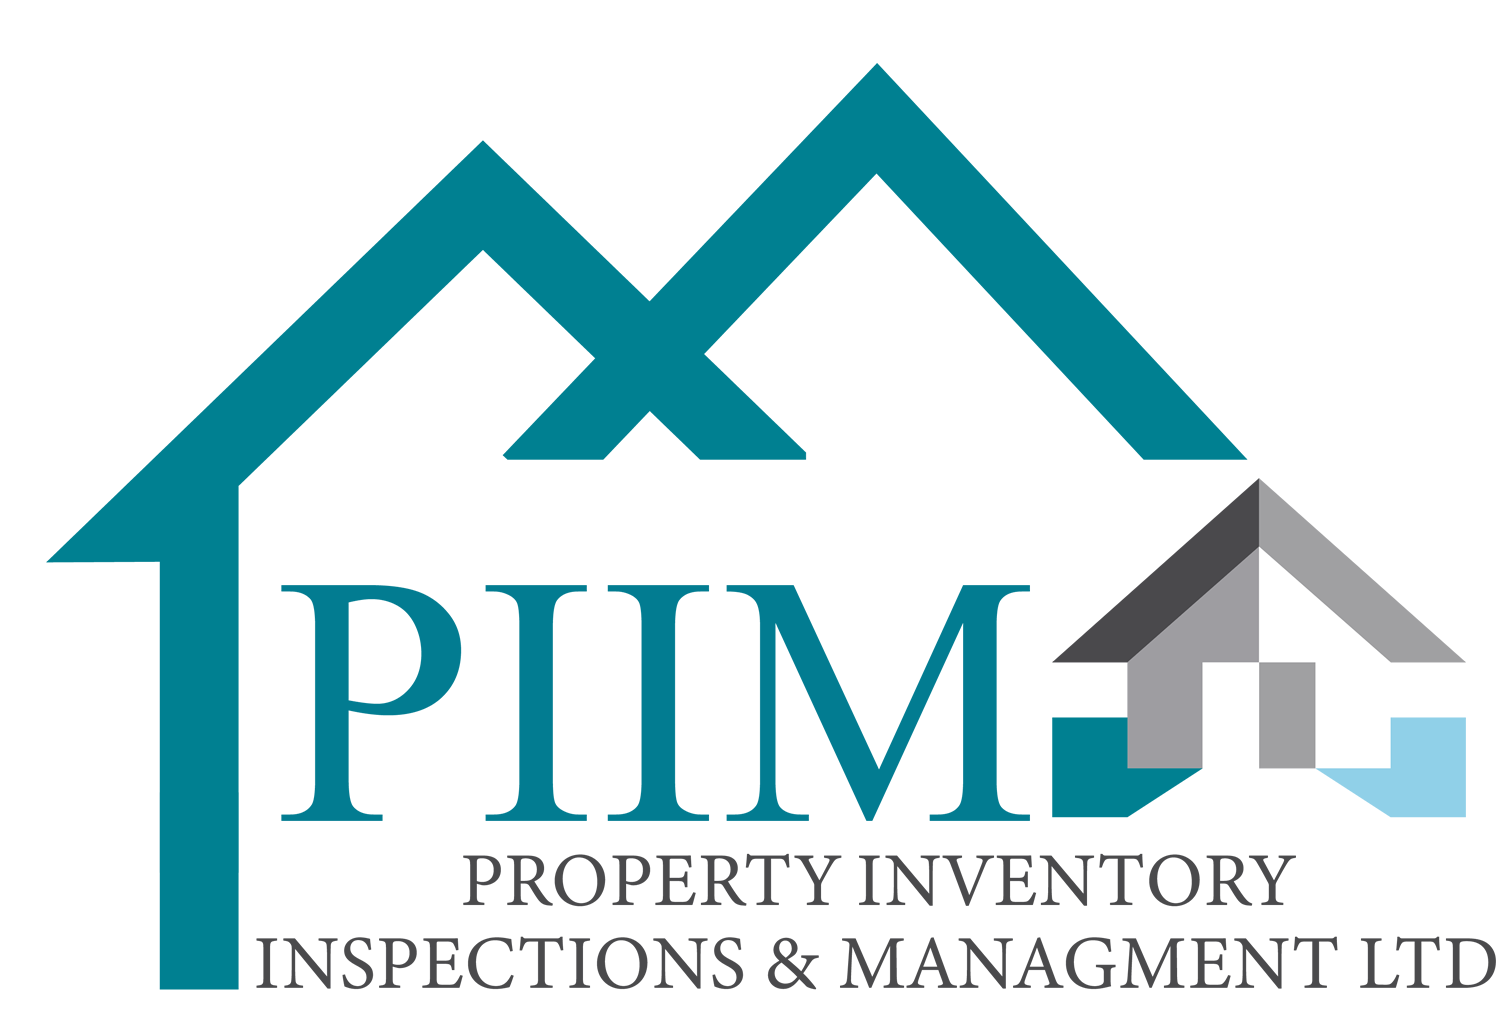 Our CompanyPIIM Property is a trading name of Property Inventory Inspections & Management LtdRegistered office: Arkless Grove, Consett, Co Durham DH8 8ABCompany No. 13414820Property Redress Scheme No. 022672Propertymark Client Money Protection. C0133202